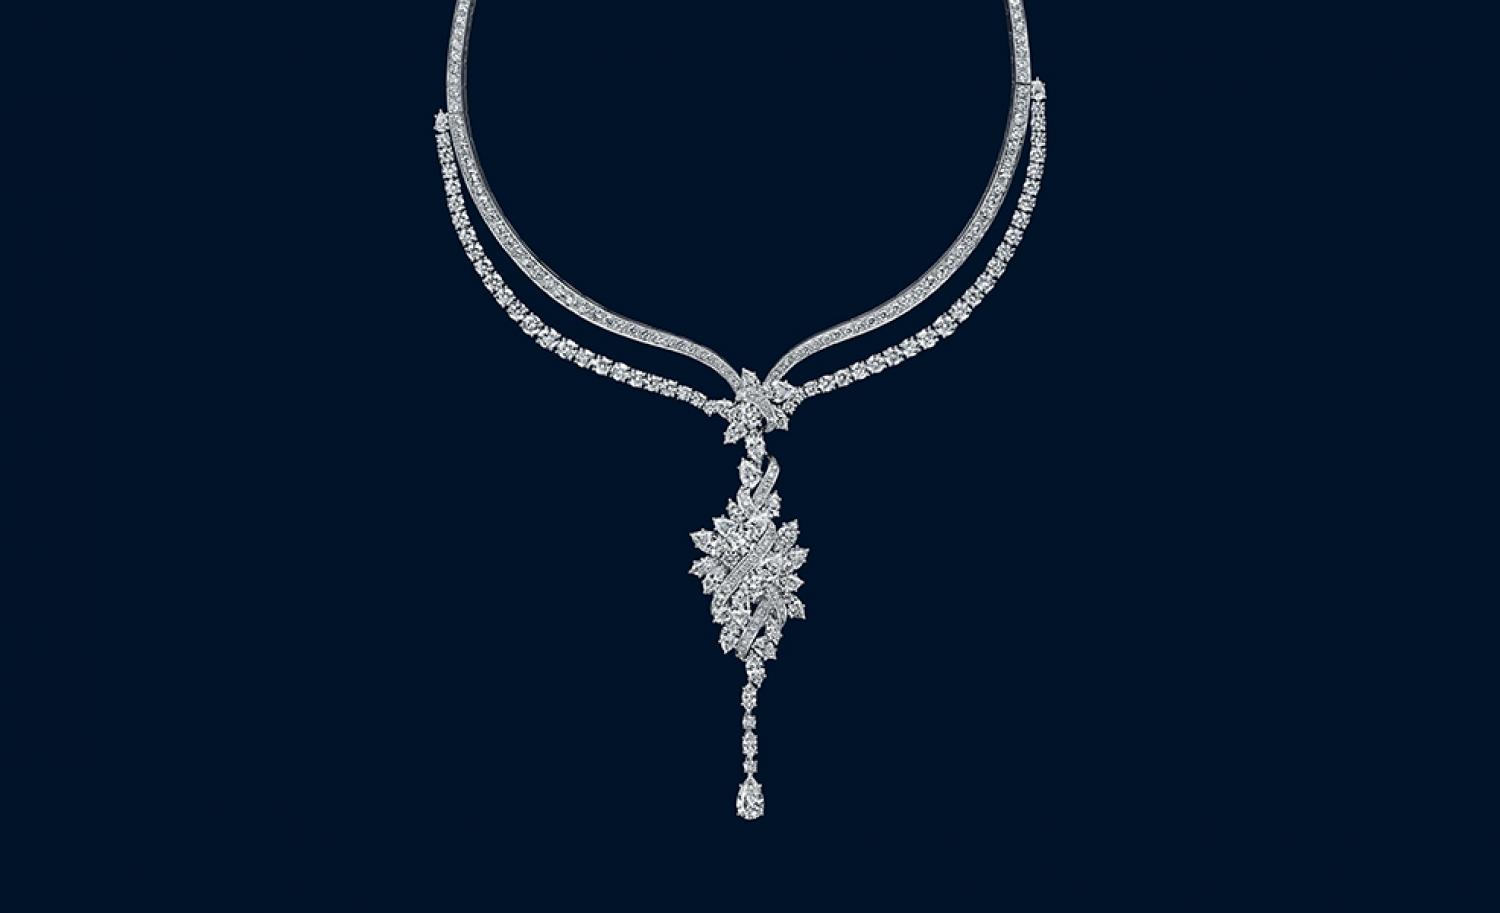 The Secret Cluster diamond necklace can be draped and worn in different ways such as a sautoire, a three row necklace, or a back drop pendant. Photo courtesy: Harry Winston.